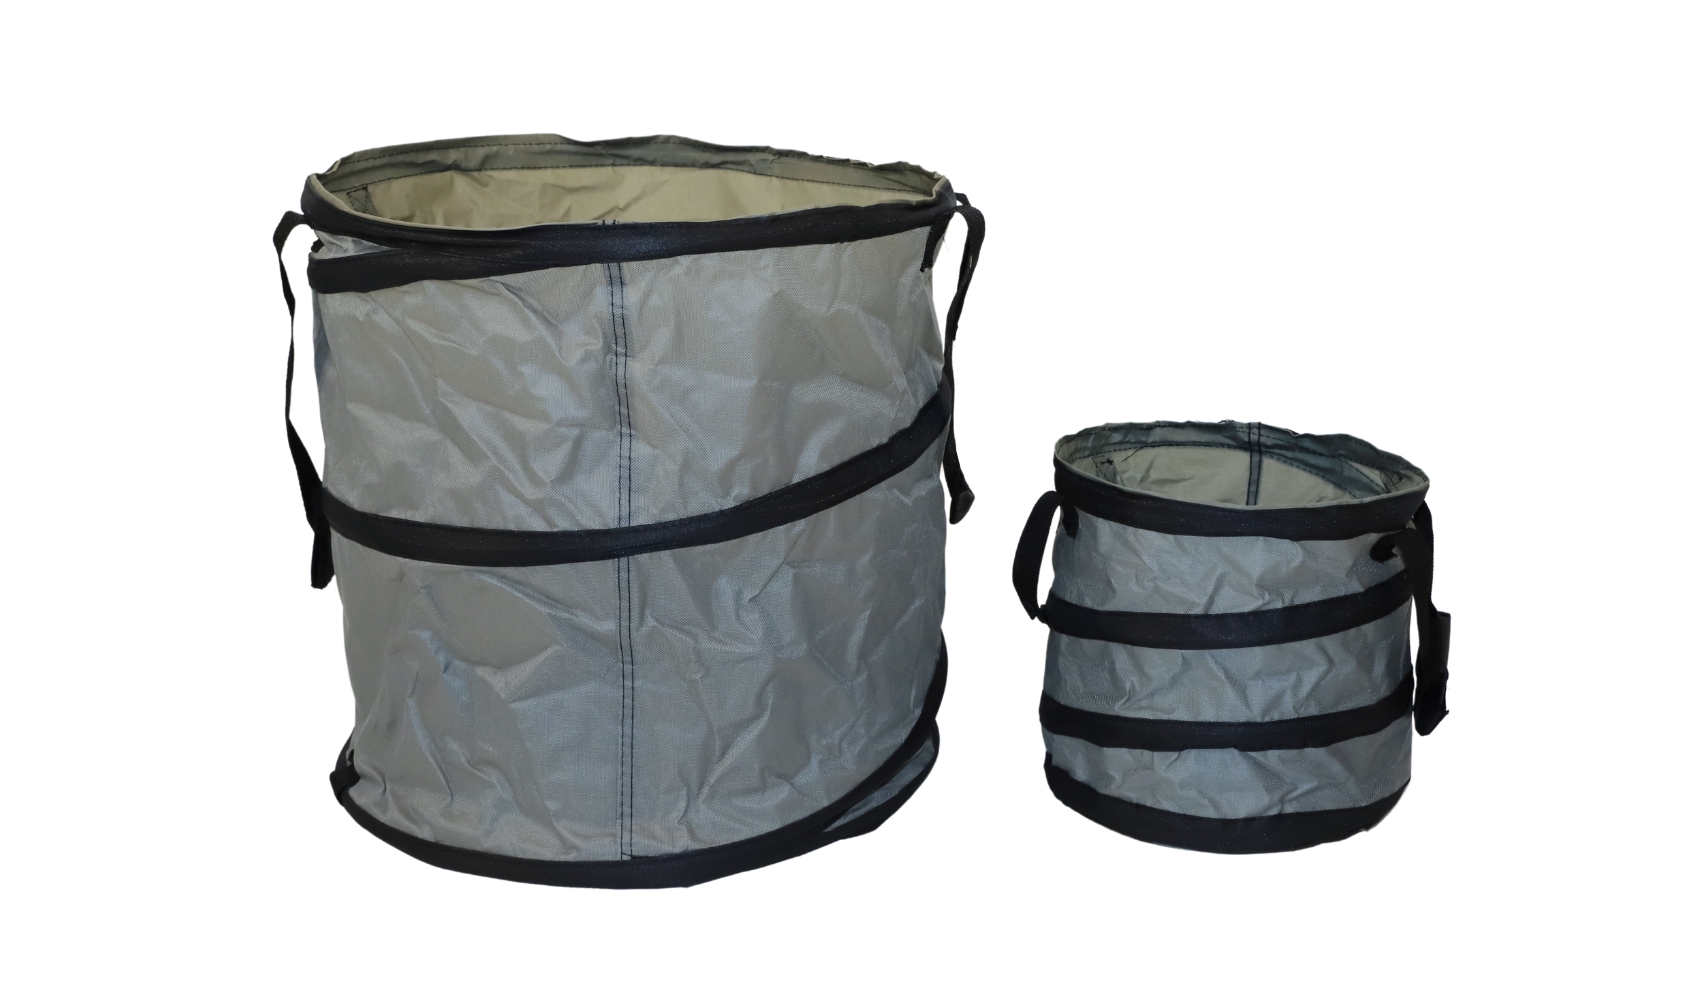 Collapsible Trash Can